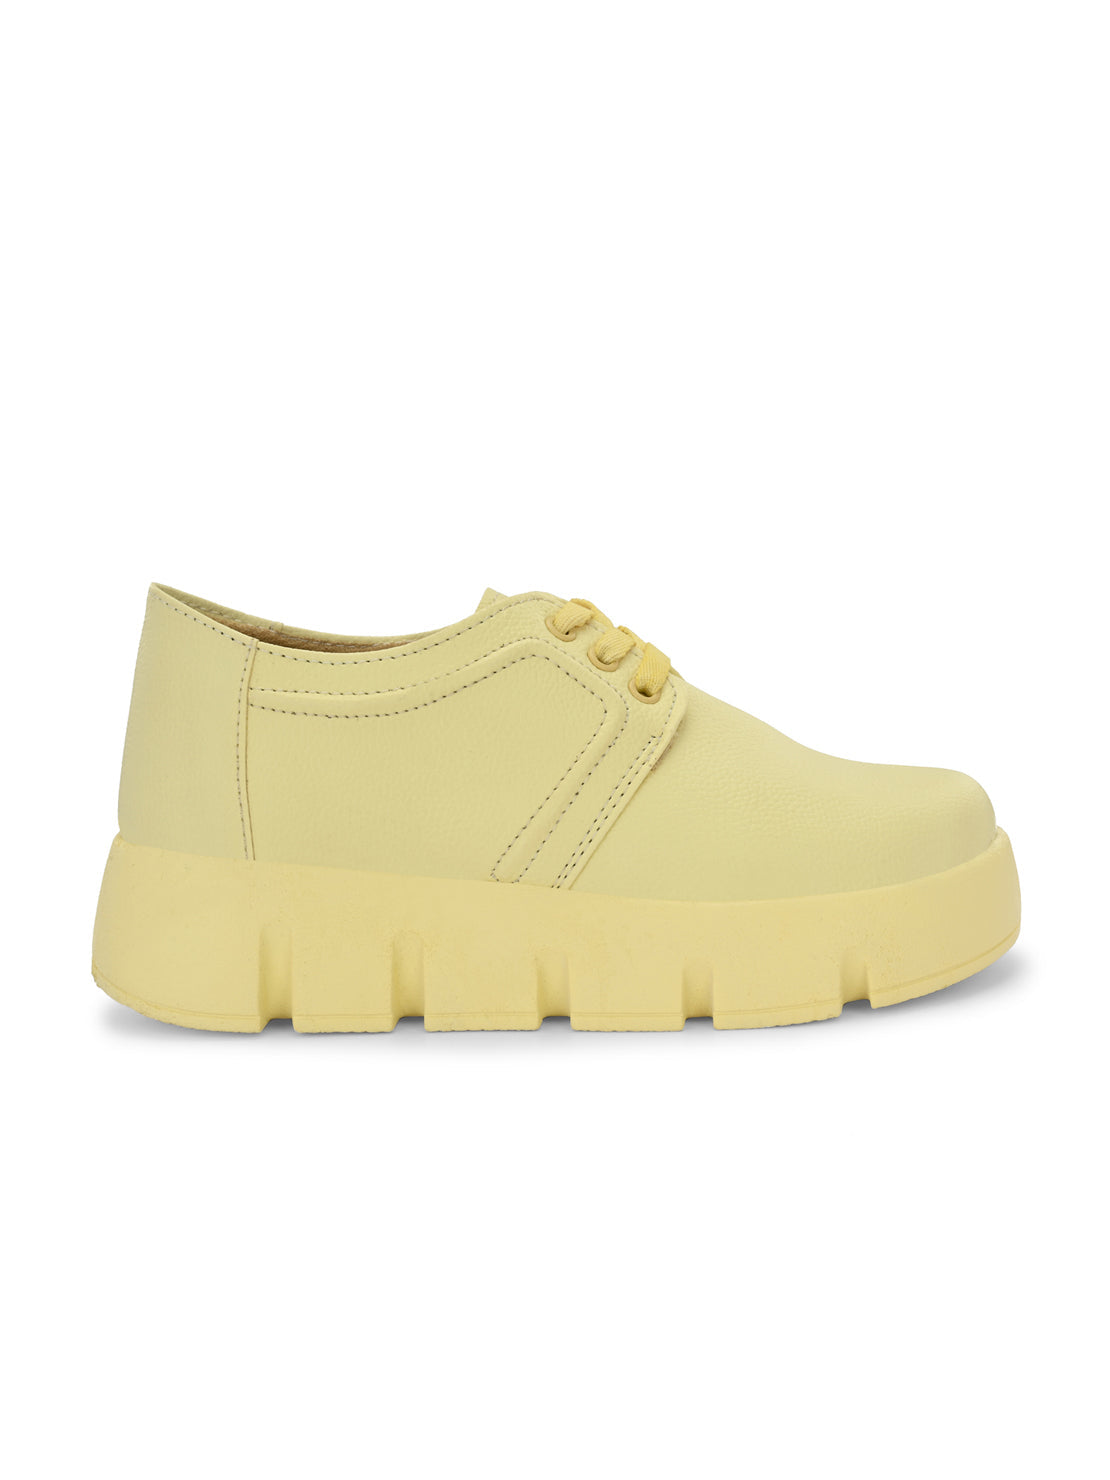 Hirolas® Women's Yellow Chunky Casual Lace-Up Sneaker_Shoes (HRLWF17YLW)